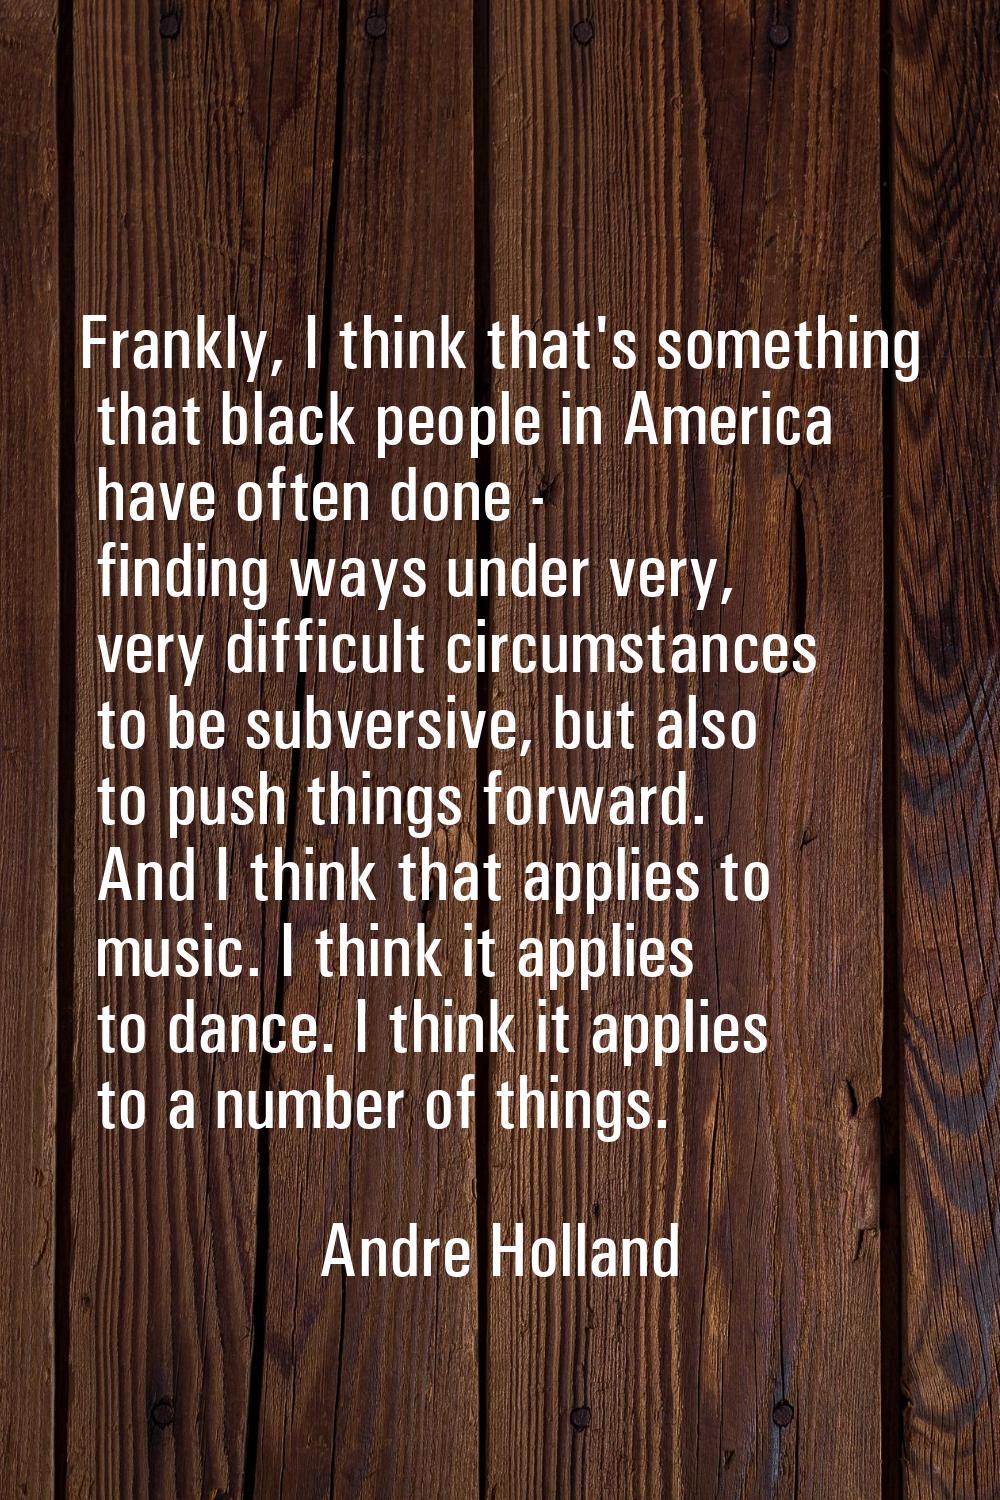 Frankly, I think that's something that black people in America have often done - finding ways under